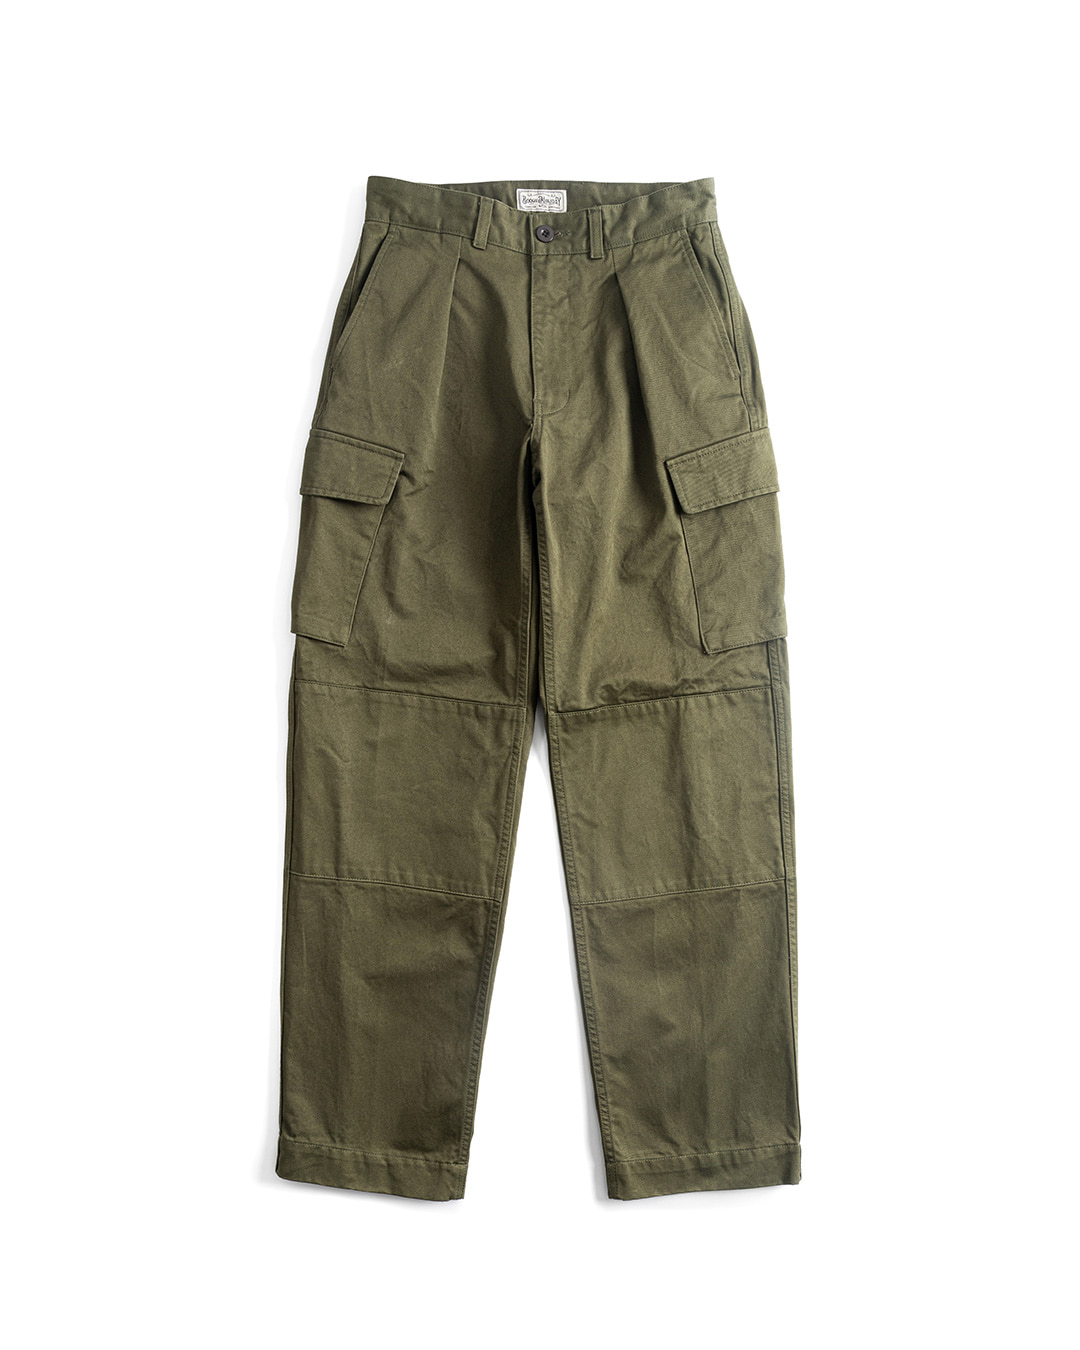 08 MILITARY CARGO PANTS (olive)